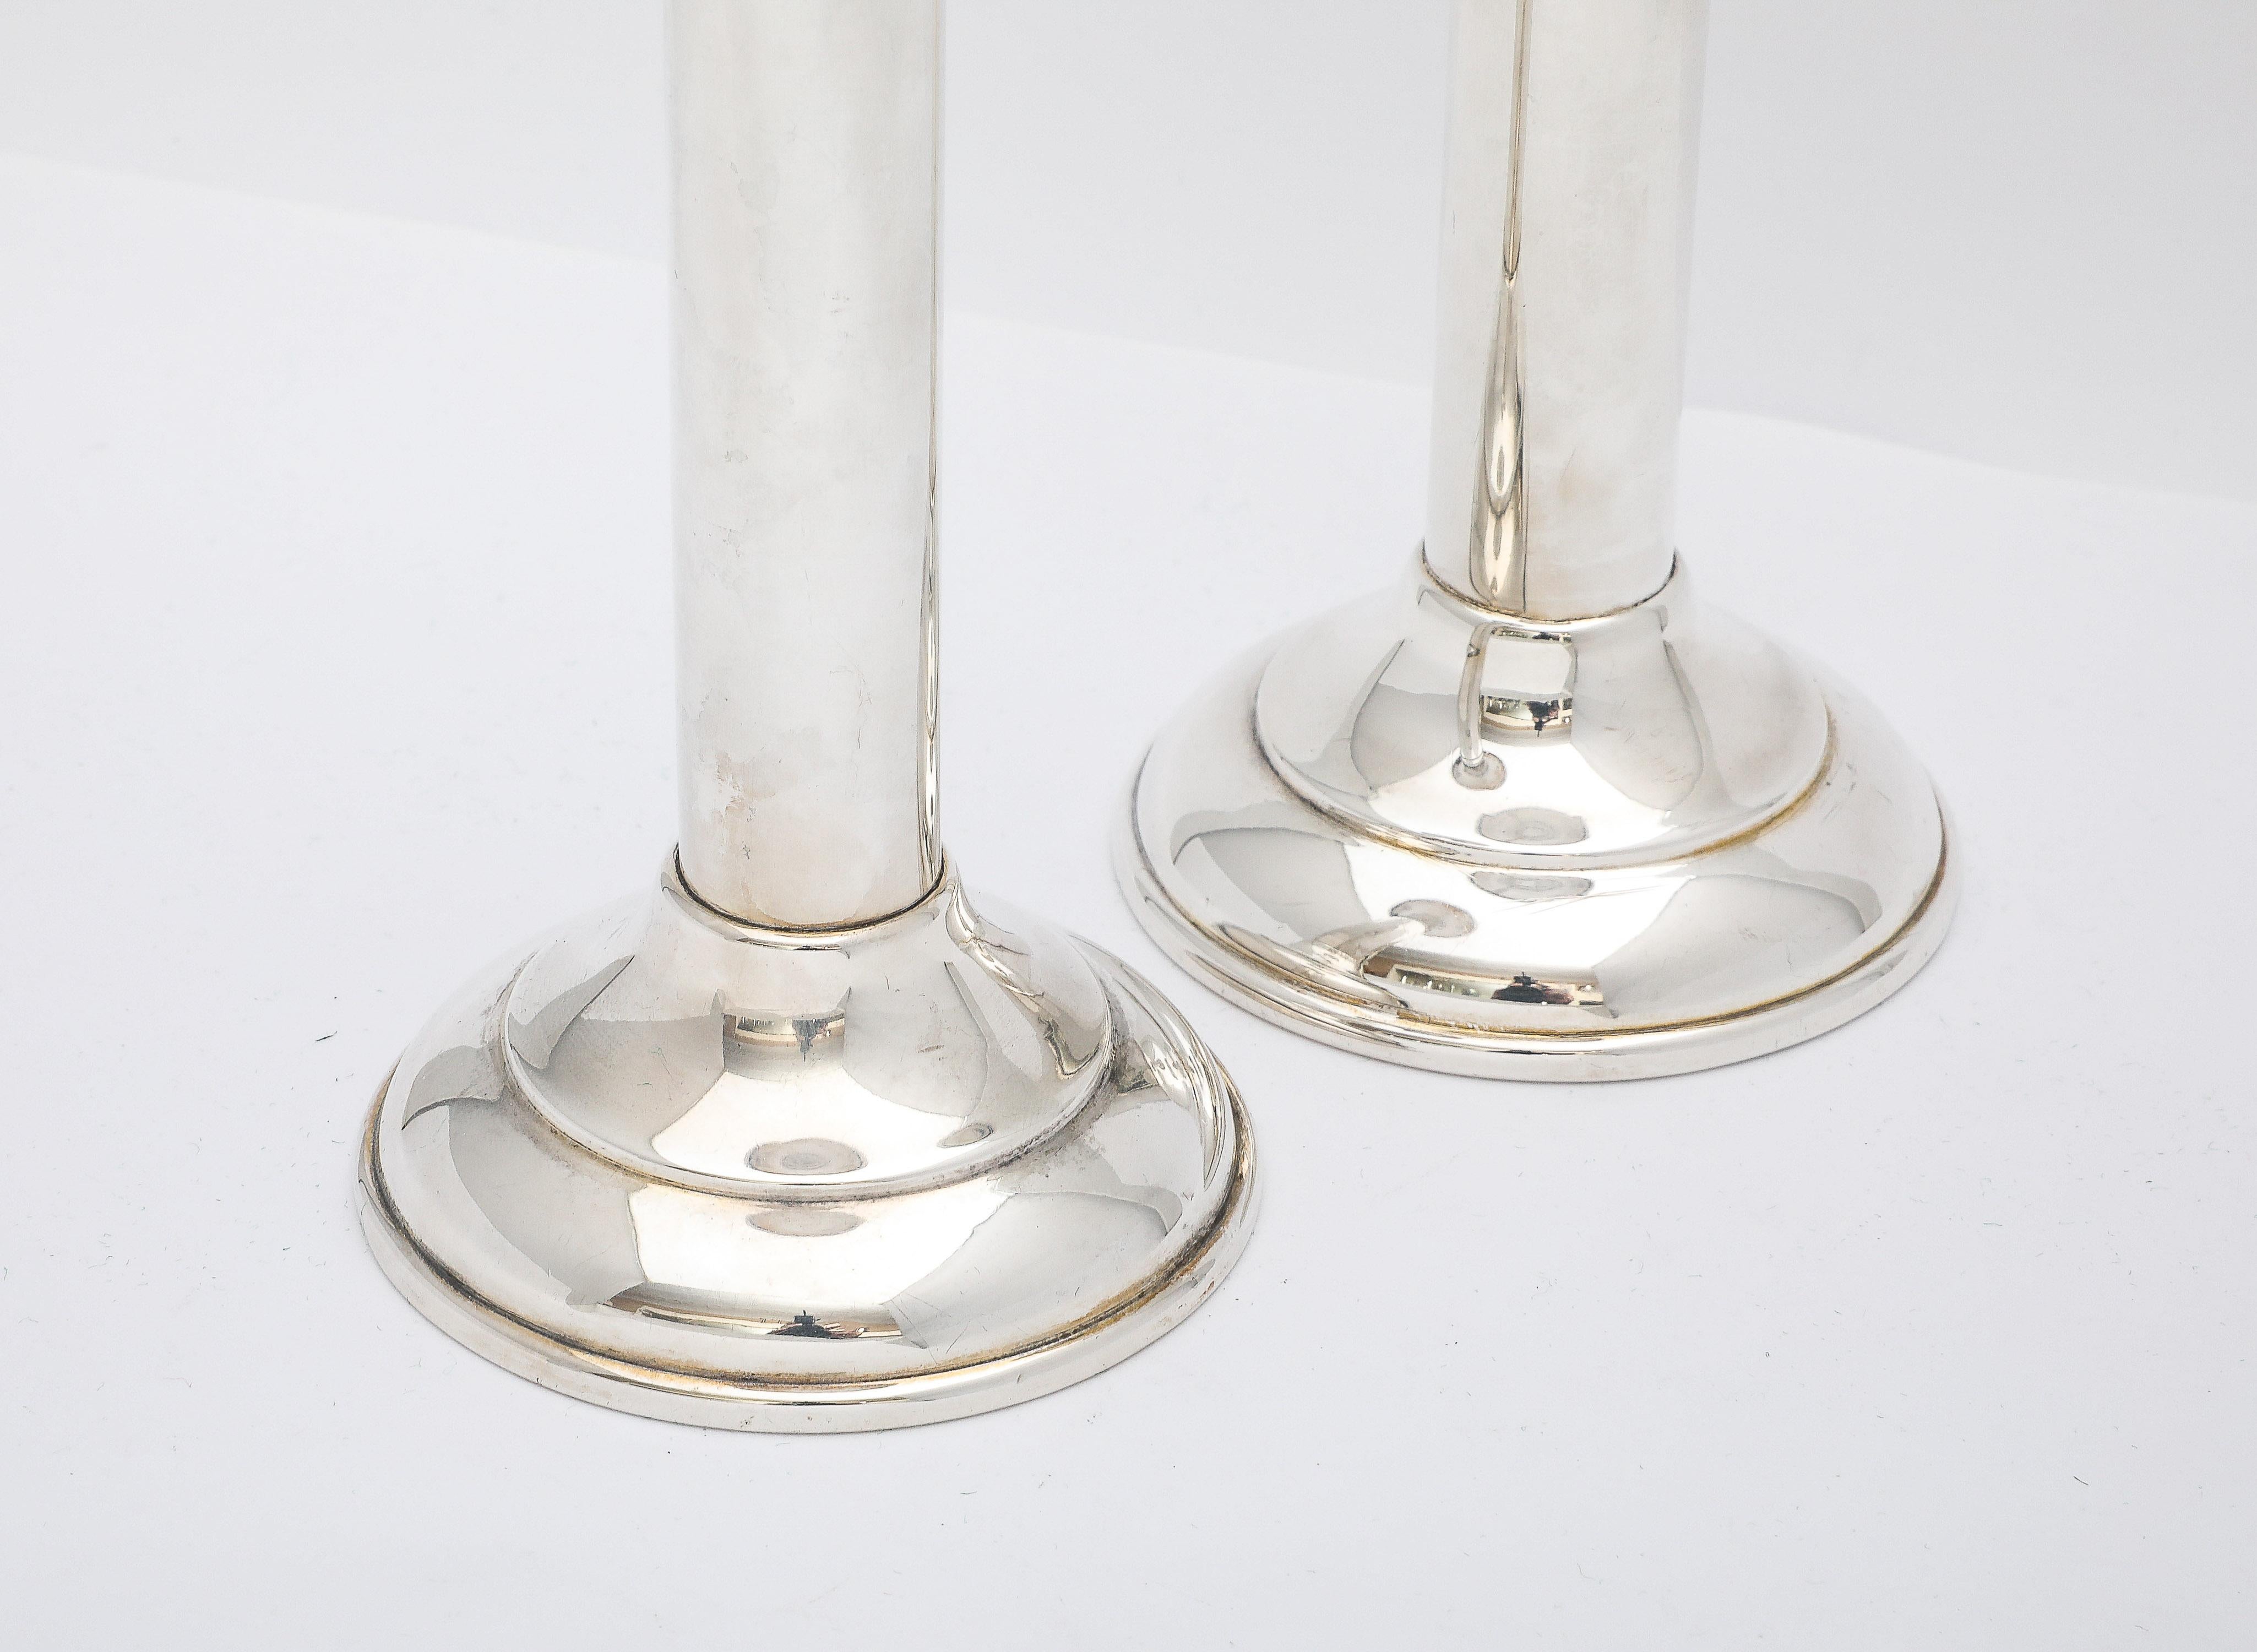 Pair of Edwardian Period Sterling Silver Candlesticks 10